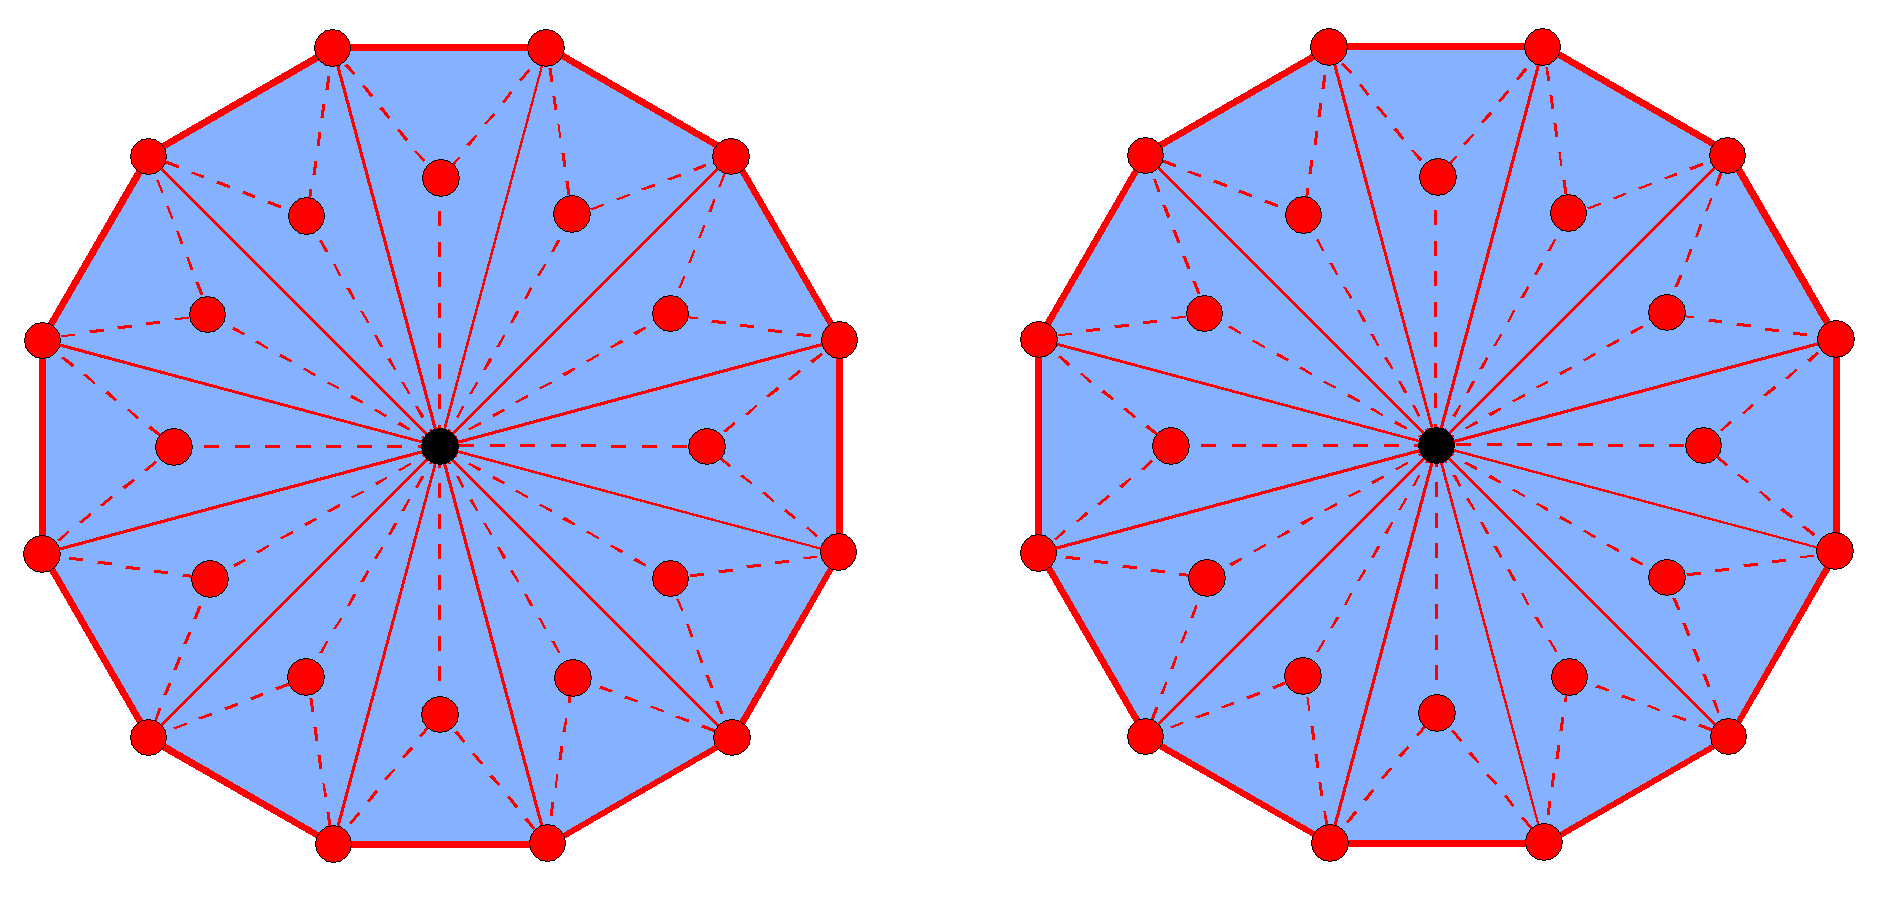 (120+120) geometrical elements surround centres of two Type B dodecagons